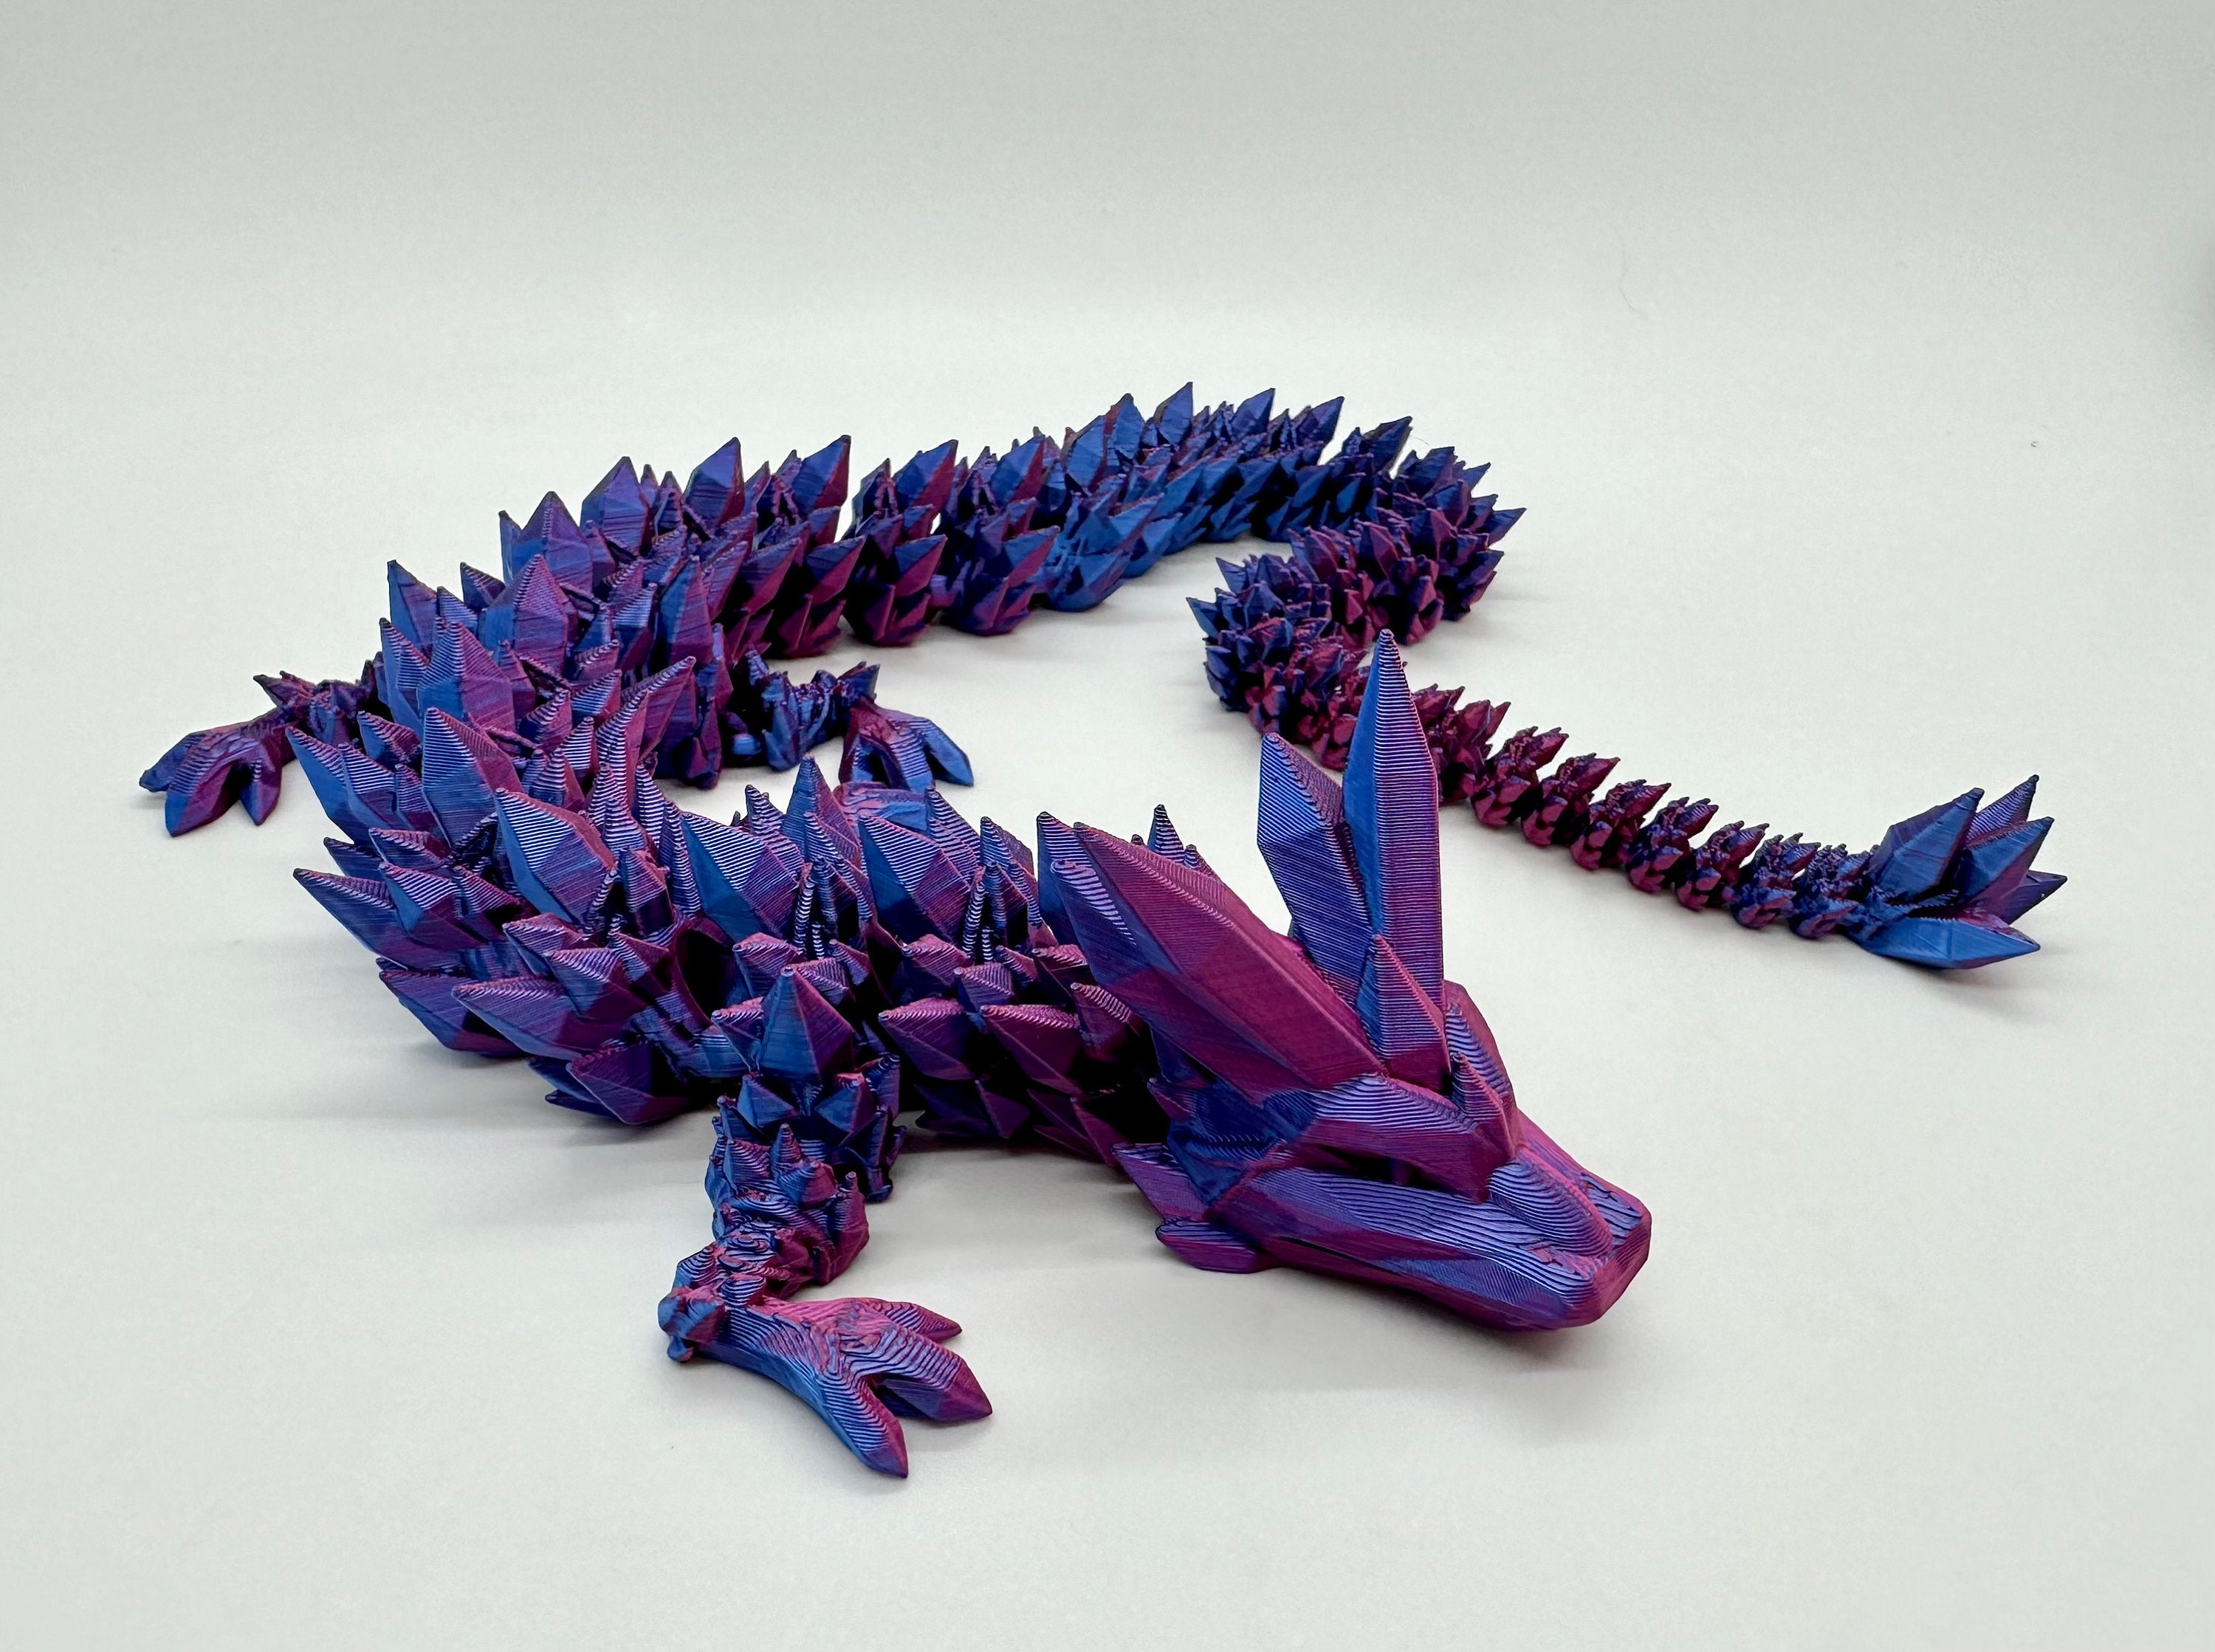 3d Printed Articulated Crystal Dragon Toy (24, Blue/Light Green)